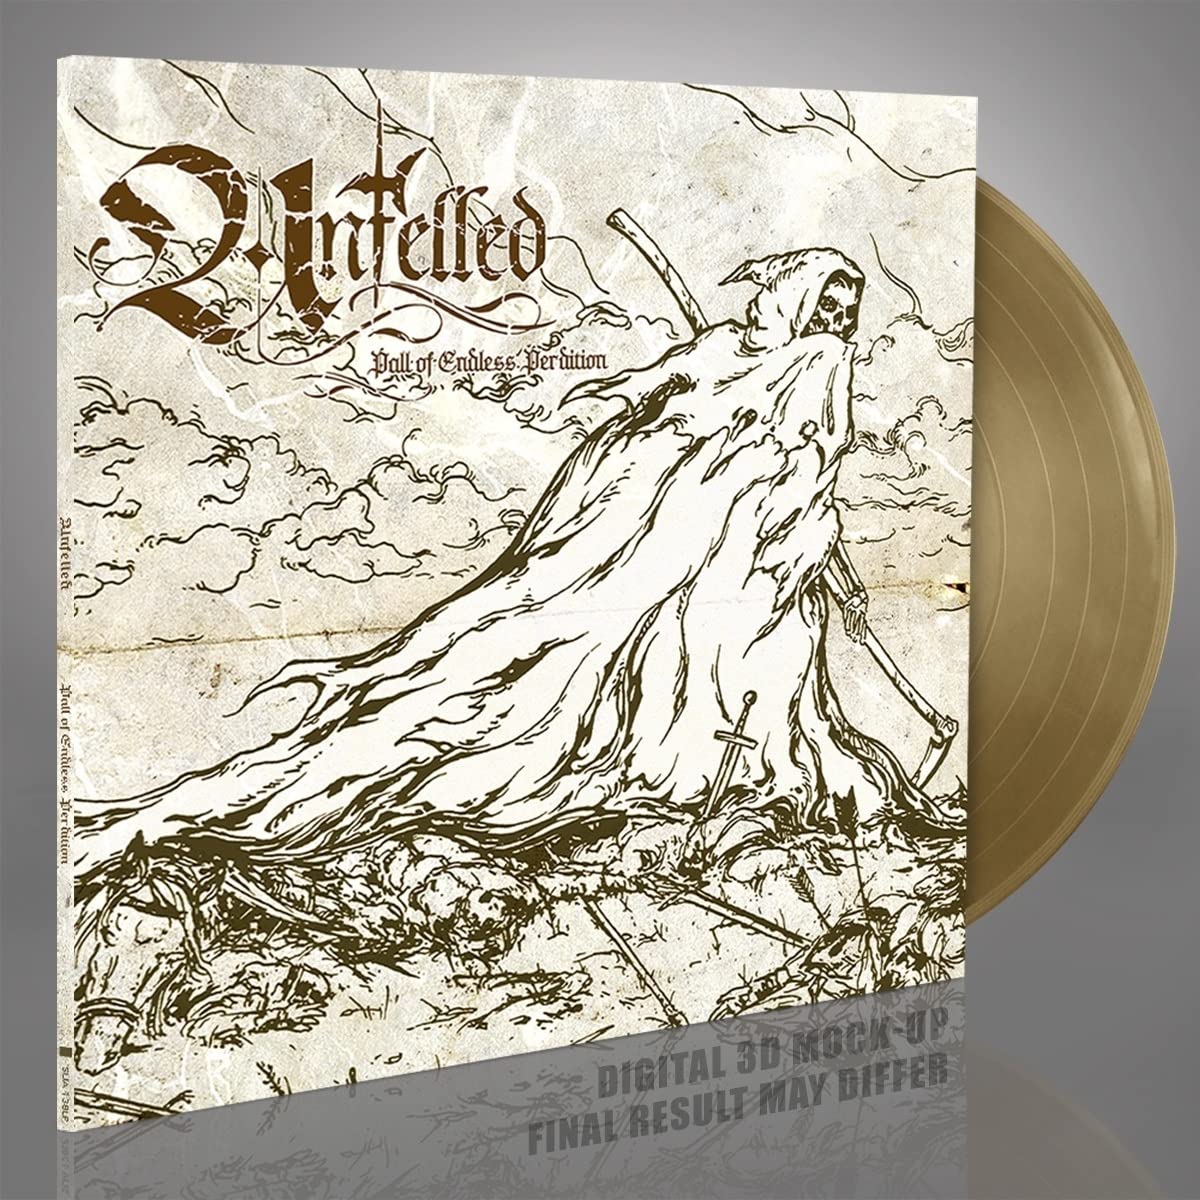 Unfelled Pall Of Endless Perdition Limited Gold Vinyl LP